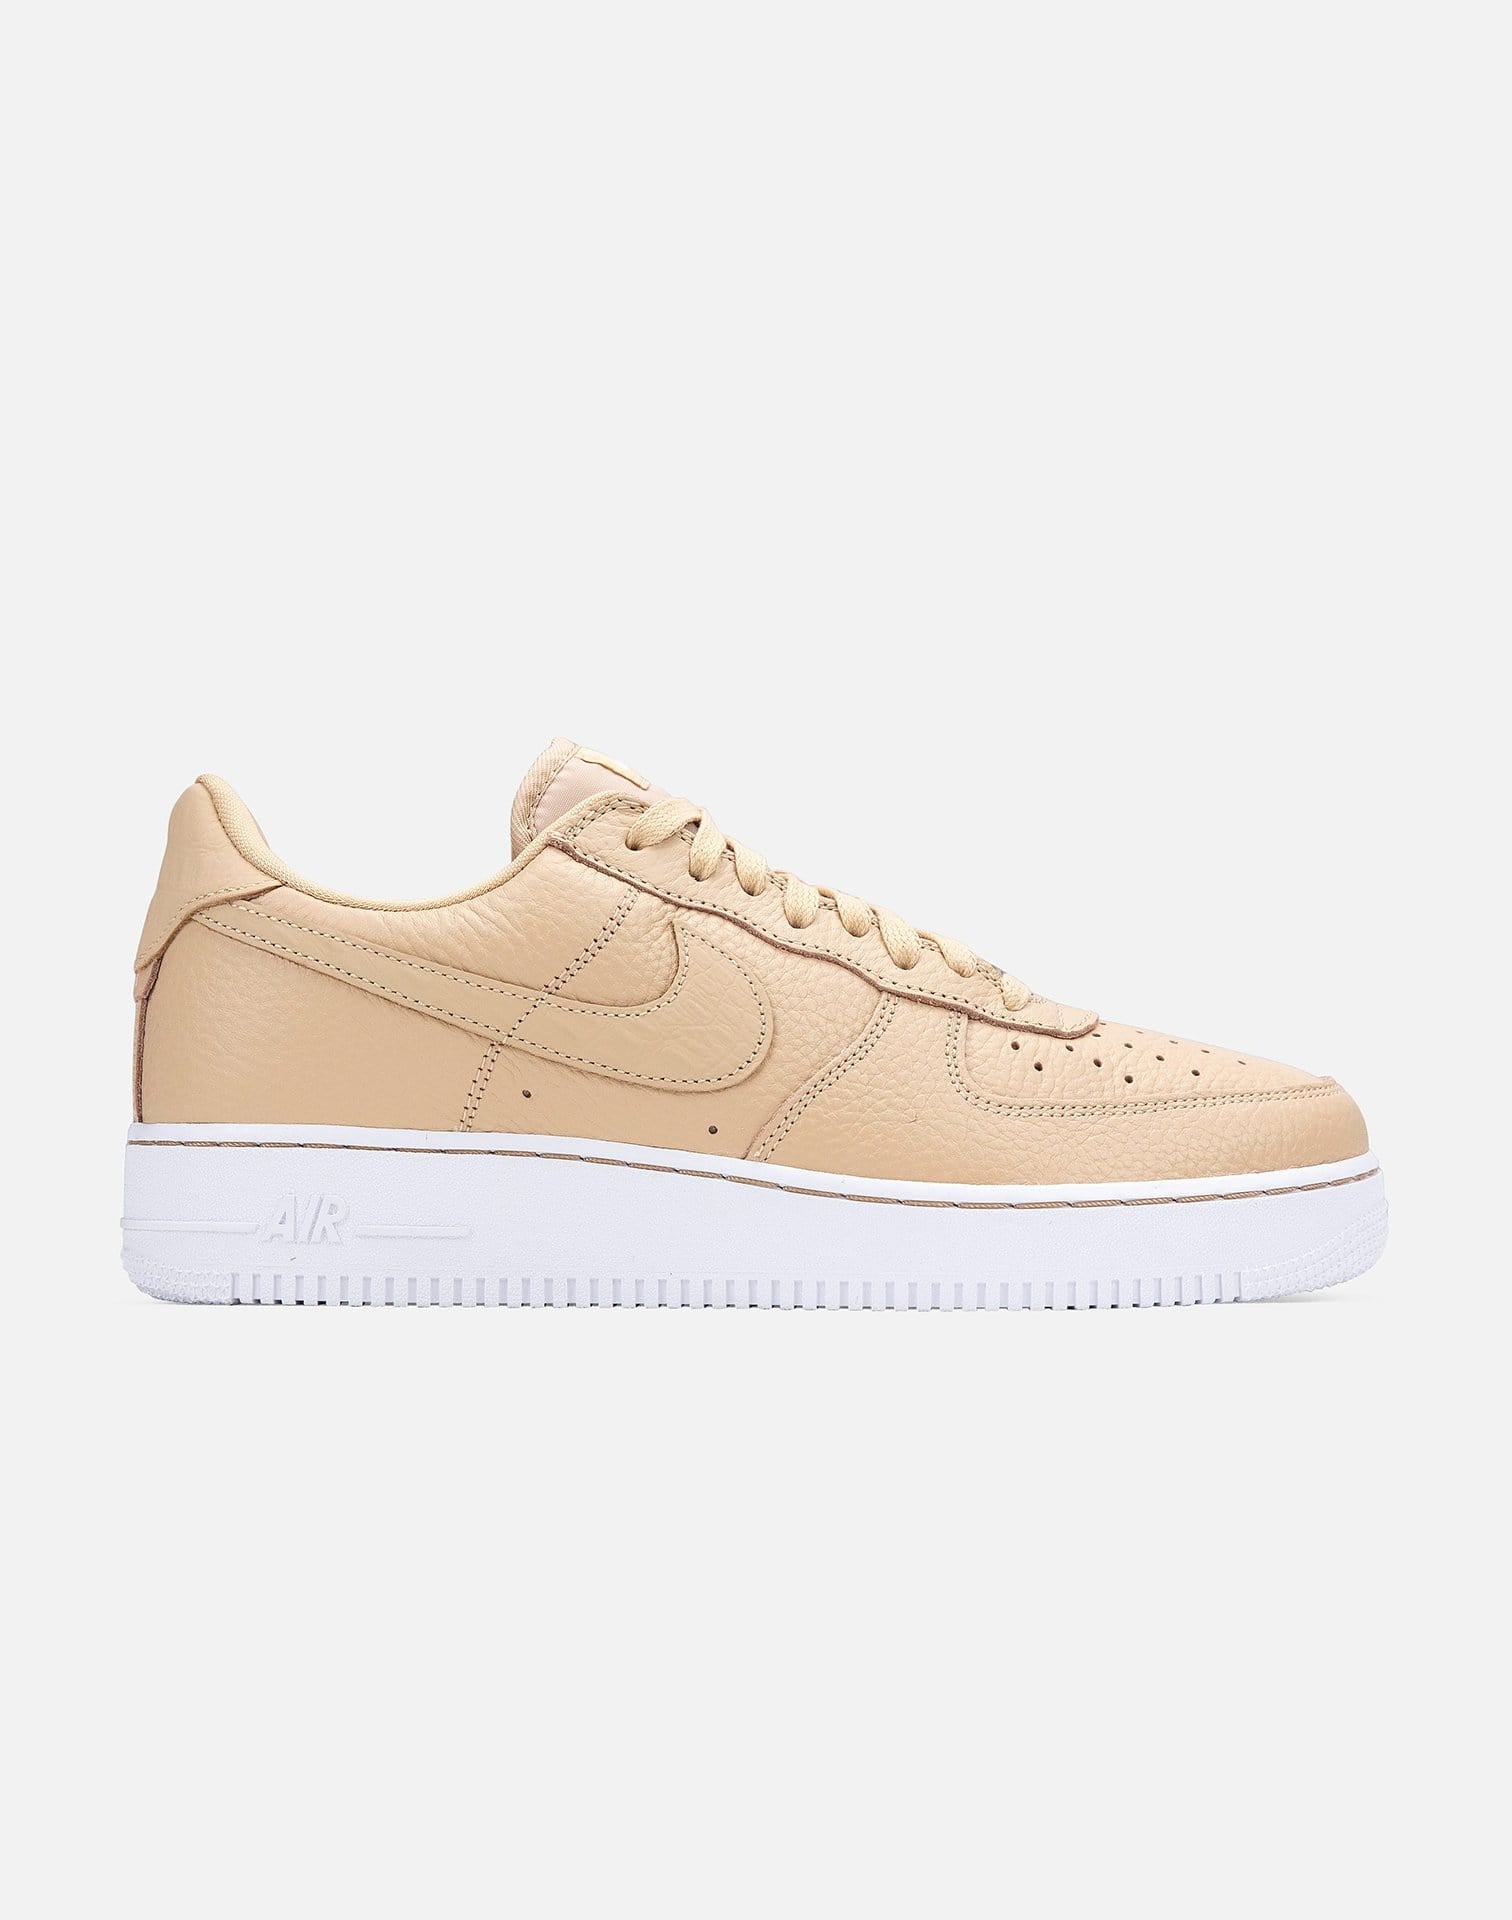 Nike Air Force 1 '07 Craft – DTLR